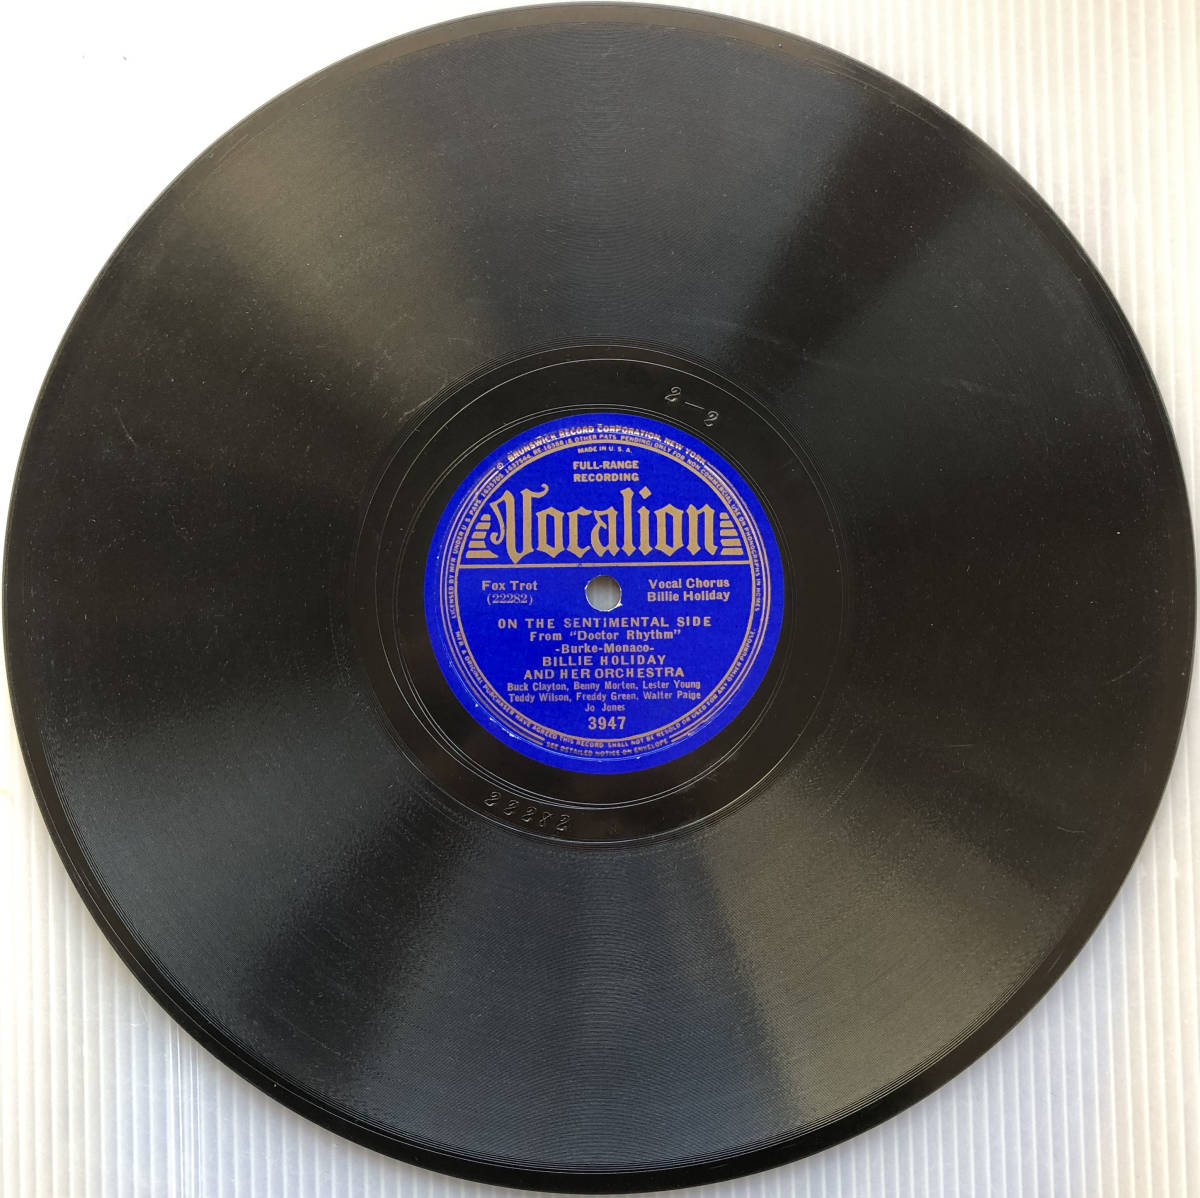 Billie Holiday /Vocalion 3947 / Now They Call It Swing / On The Sentimental Side